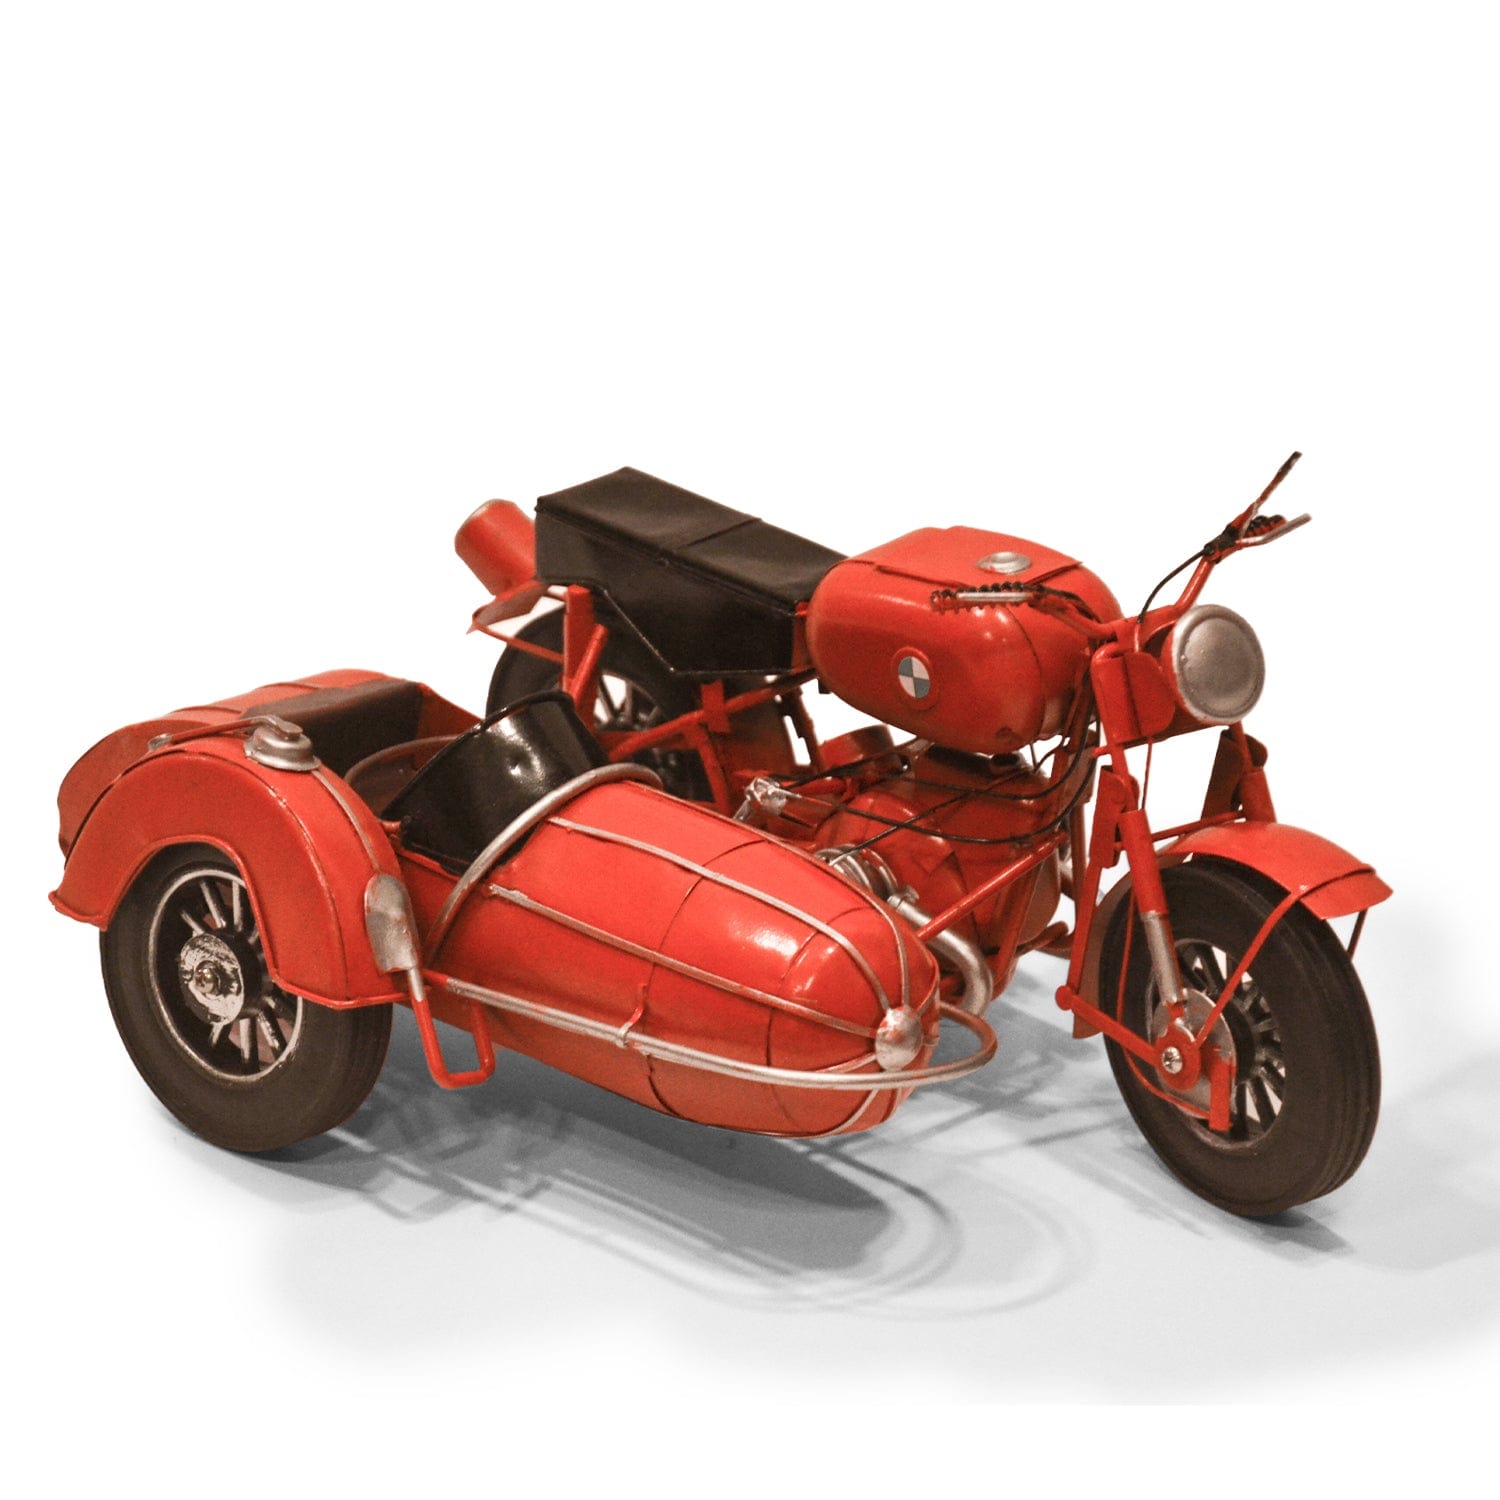 Red Butler Vintage Collection Decorative Vintage motorcycle sidecar AVVB00M06Y18A1 VVB06A1 Elevate Your Space with a Vintage Metal Bike - Modern Home Decor Redbutler